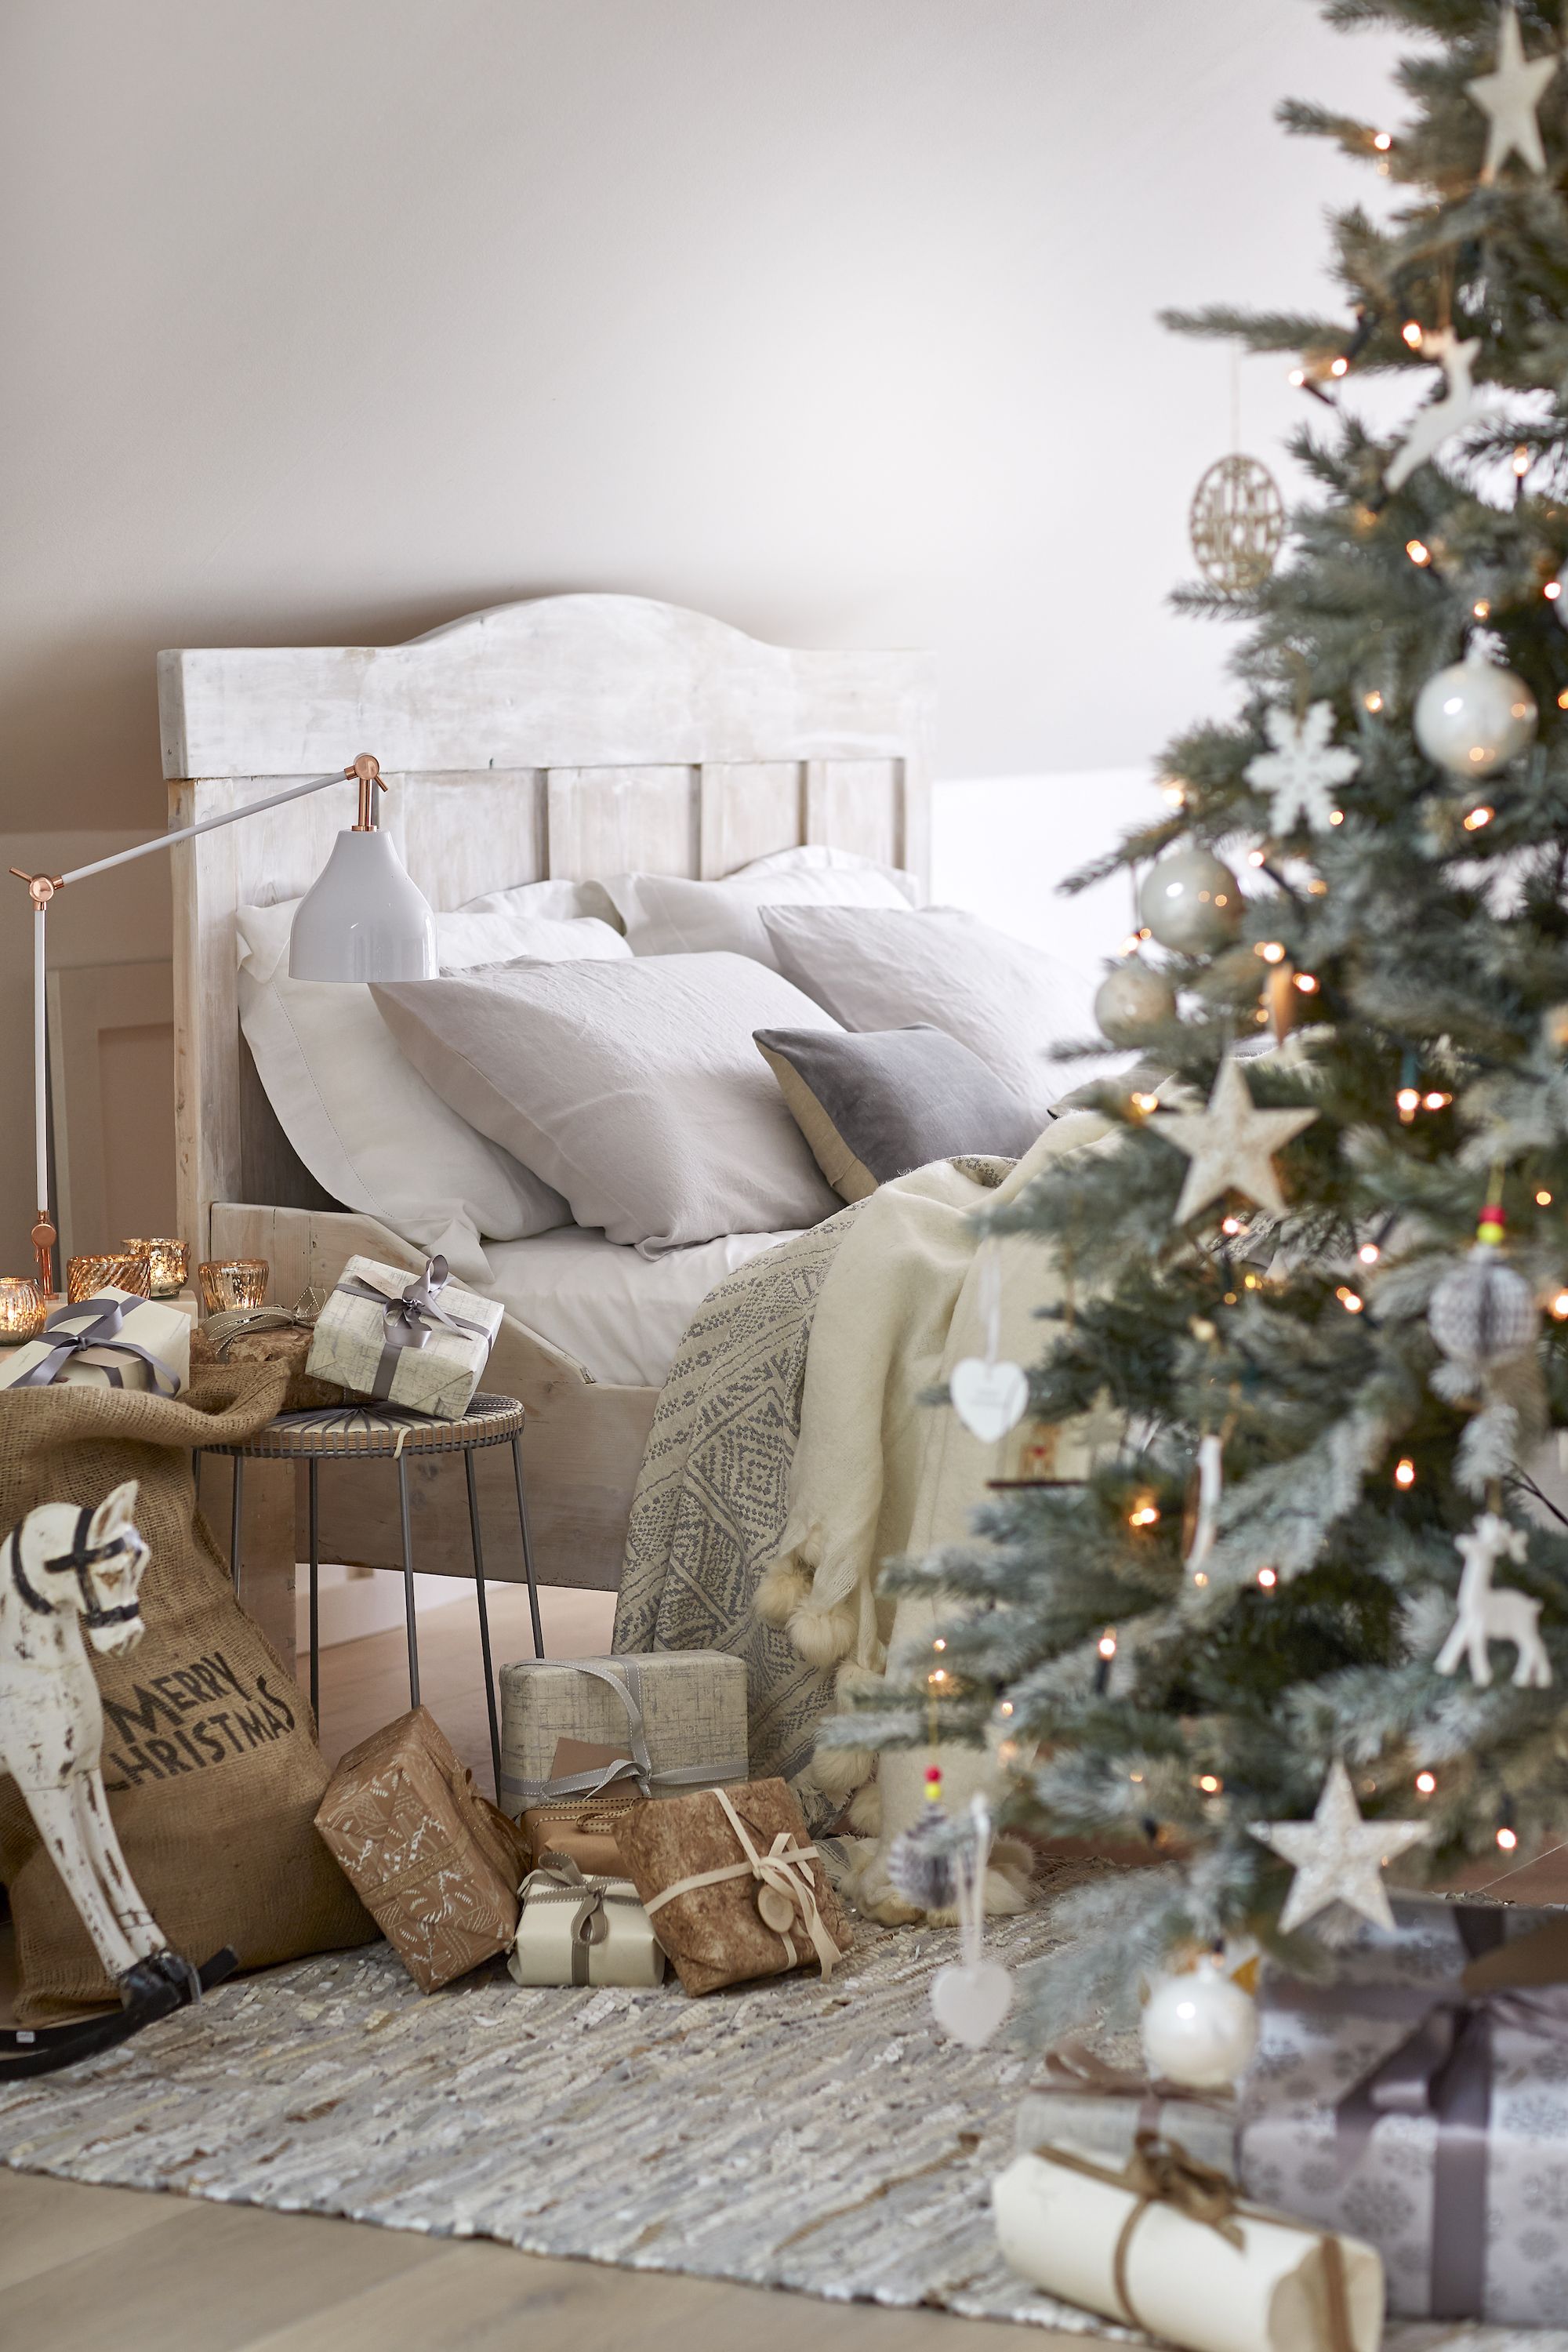 Christmas Bedroom Decor 11 Ways To Decorate At